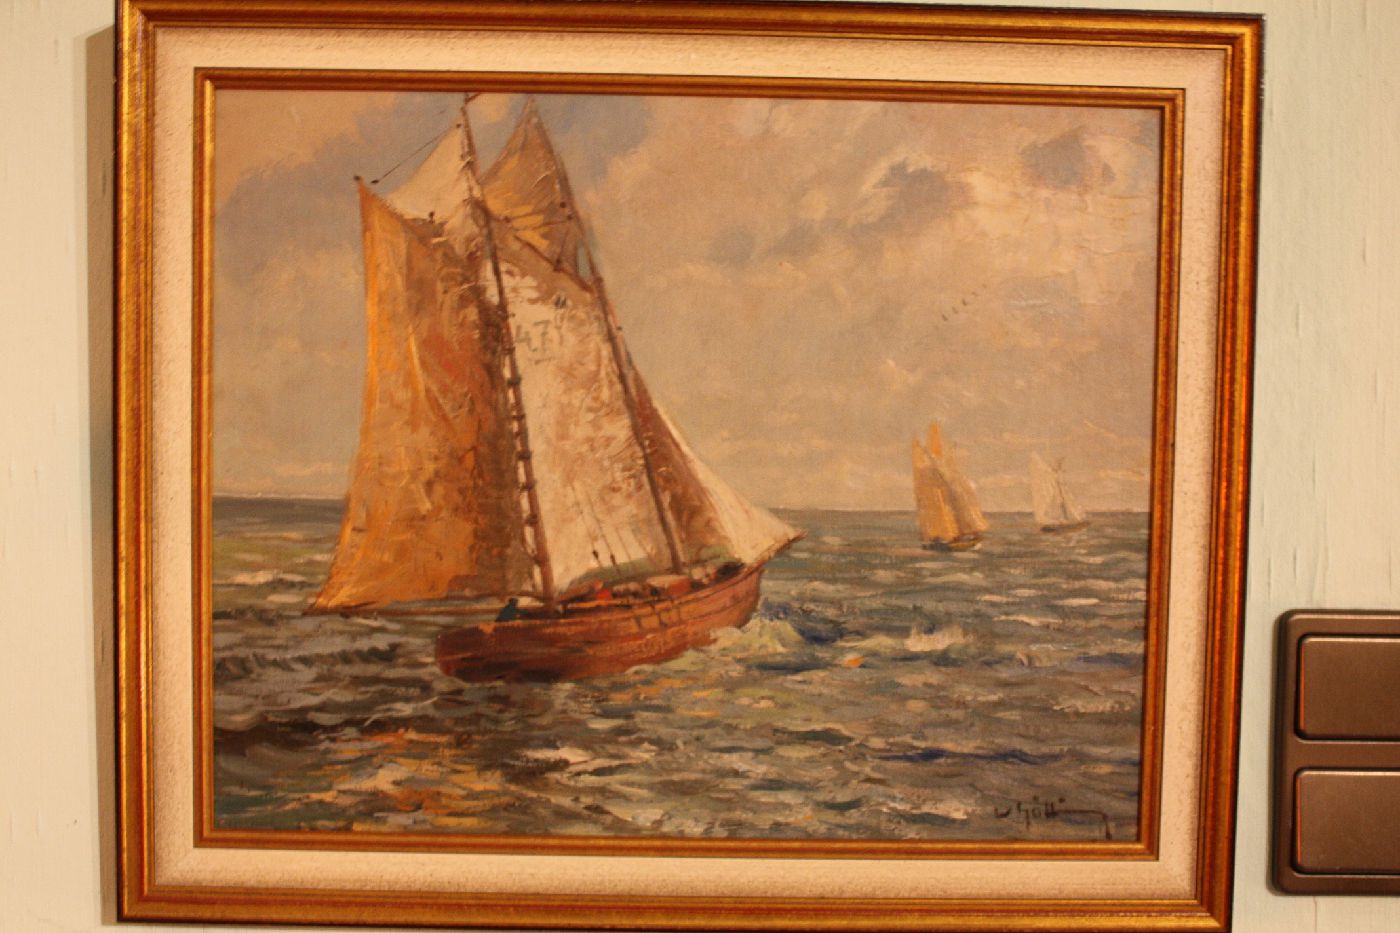 Mid-20th century signed painting of a sailing boat, oil on wood, Wilhelm Goetting (1901-1978)